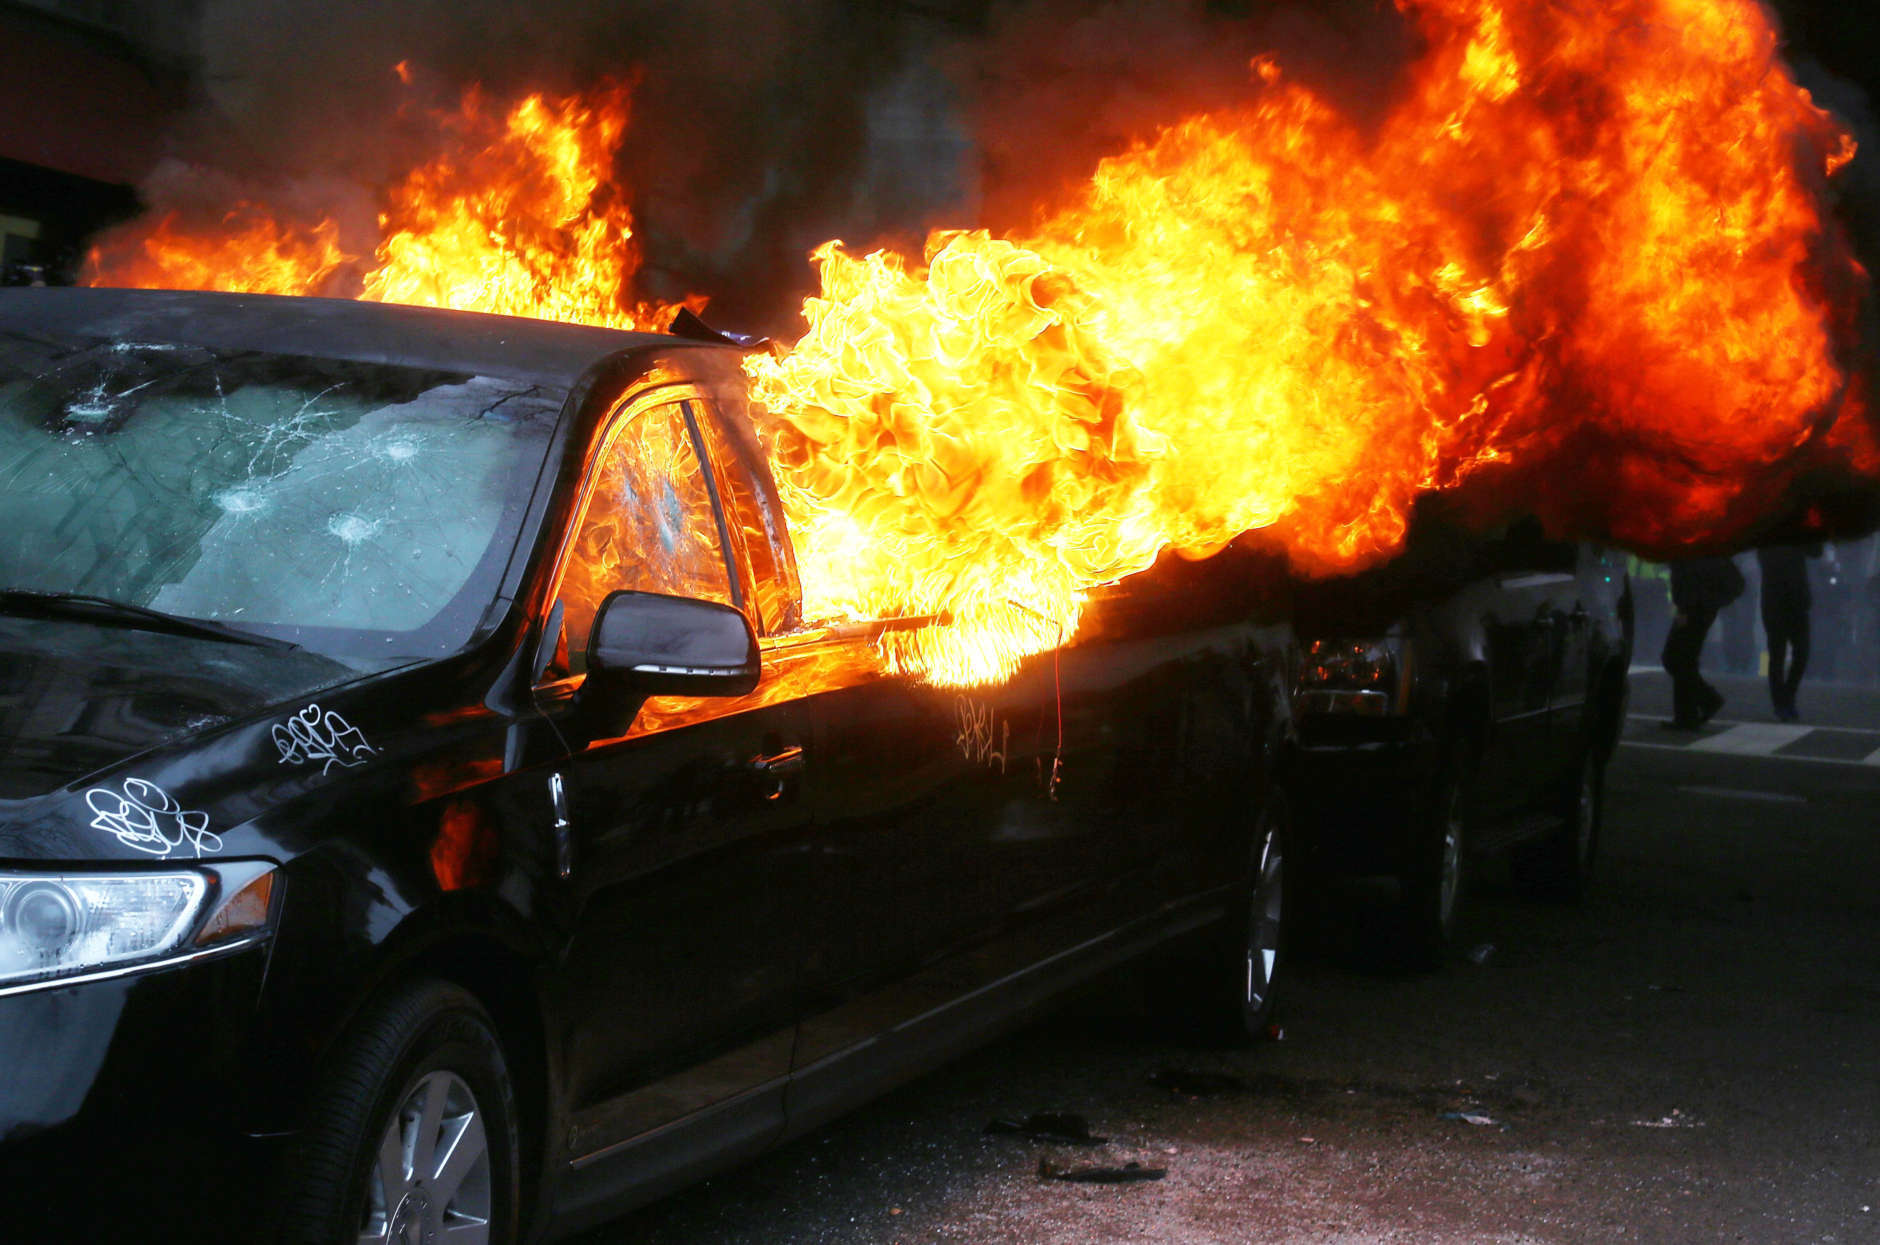 WASHINGTON, DC - JANUARY 20:  A limousine burns after being destroyed by anti-Trump protesters on K Street on January 20, 2017 in Washington, DC. President-elect Donald Trump was sworn-in as the 45th U.S. President today.  (Photo by Mario Tama/Getty Images)